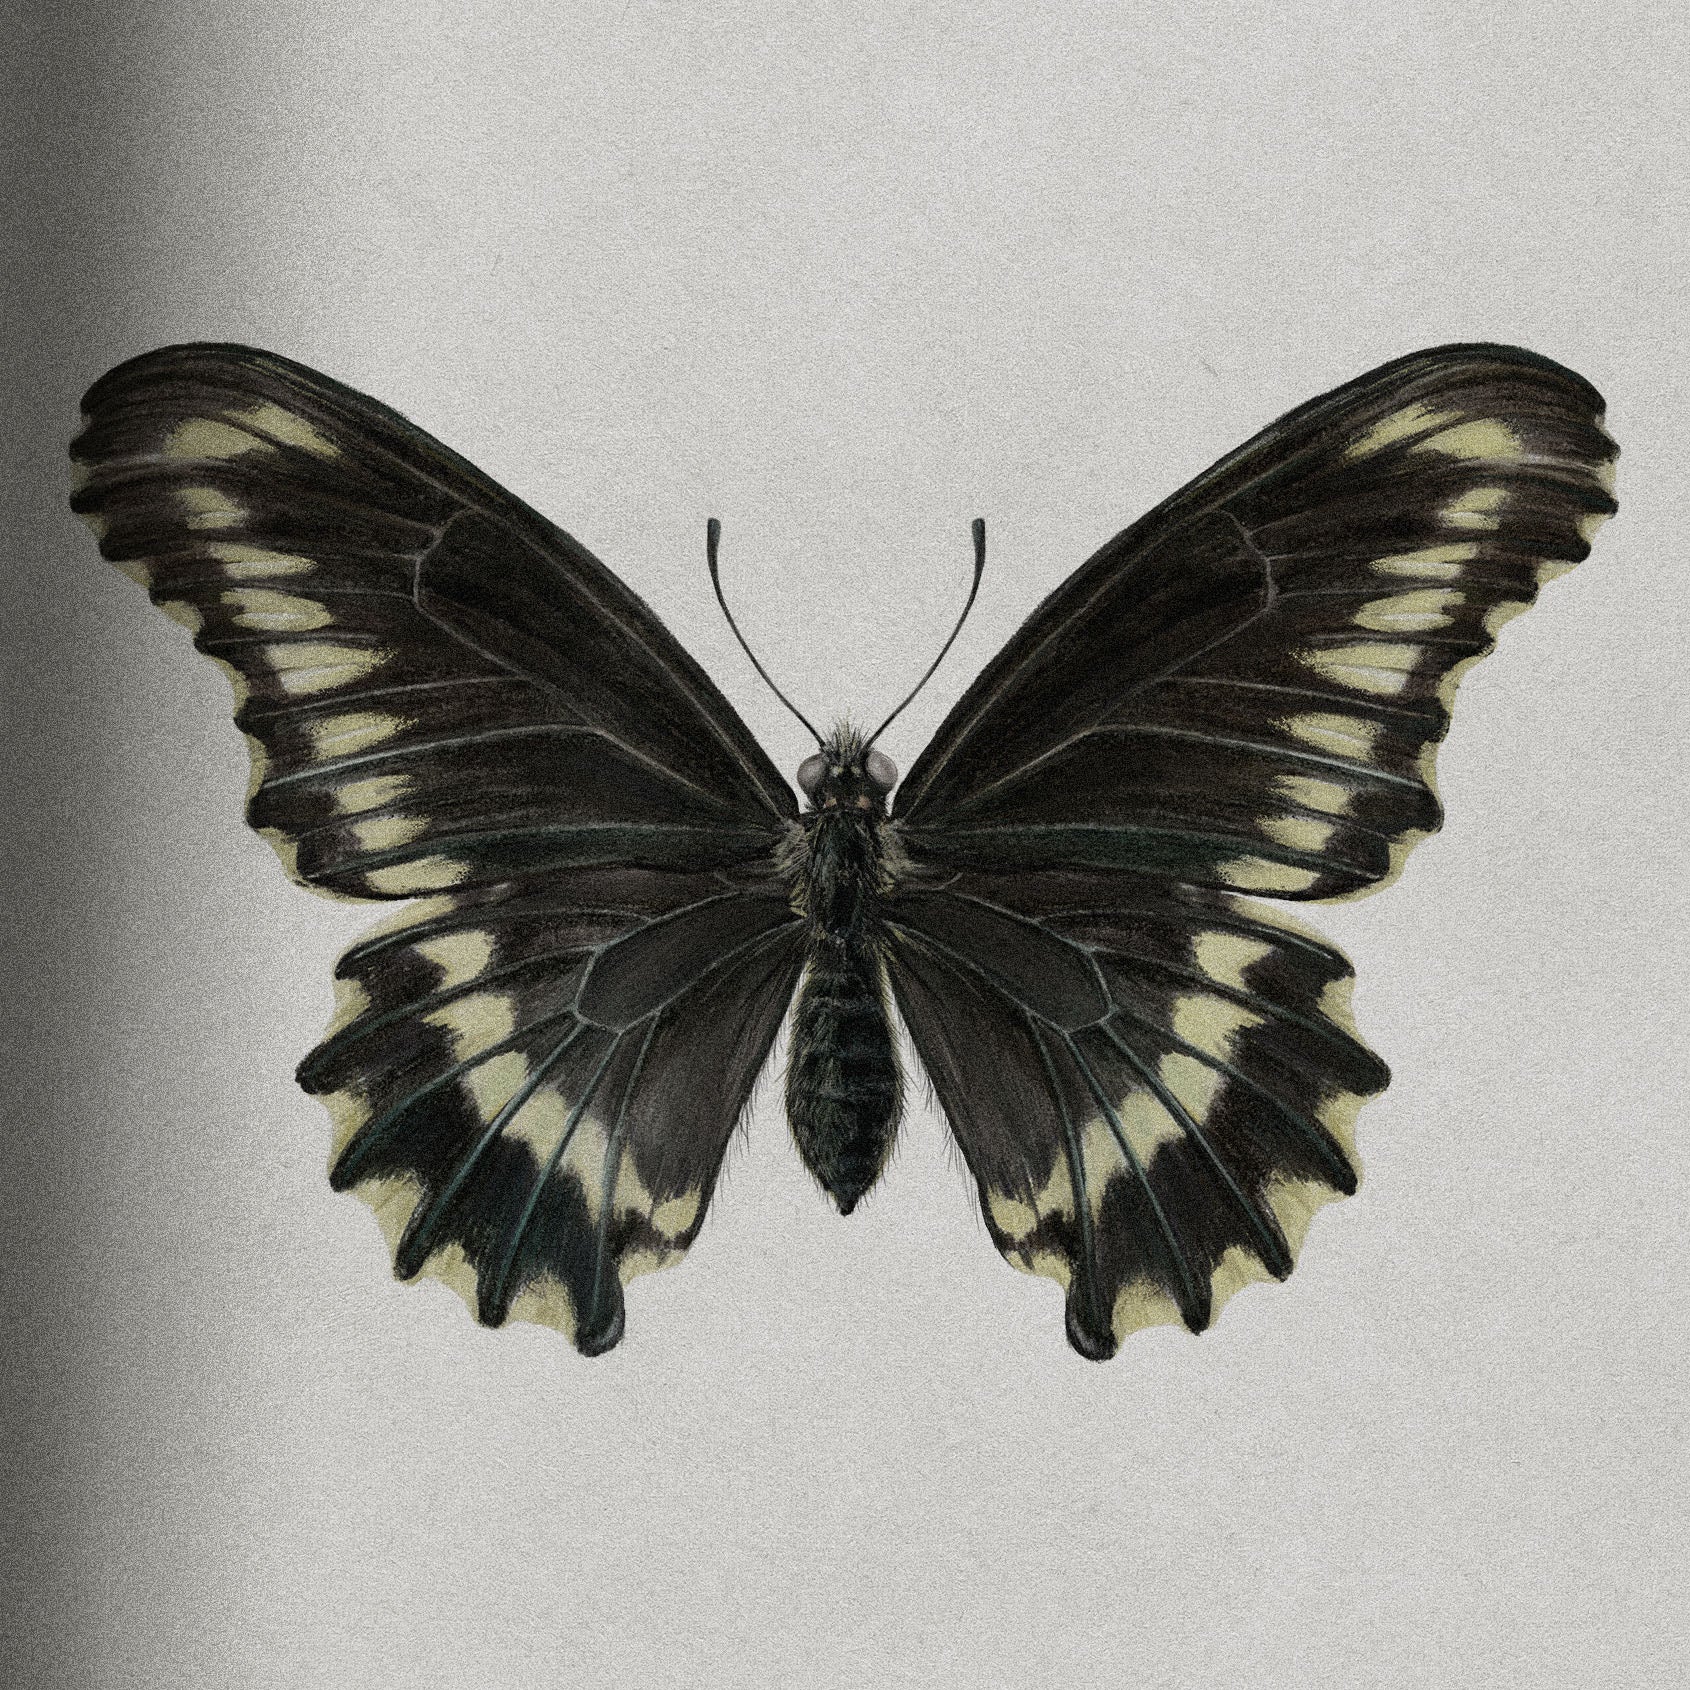 illustration of black papilonio butterfly from chile by nature artist antonia reyes montealegre